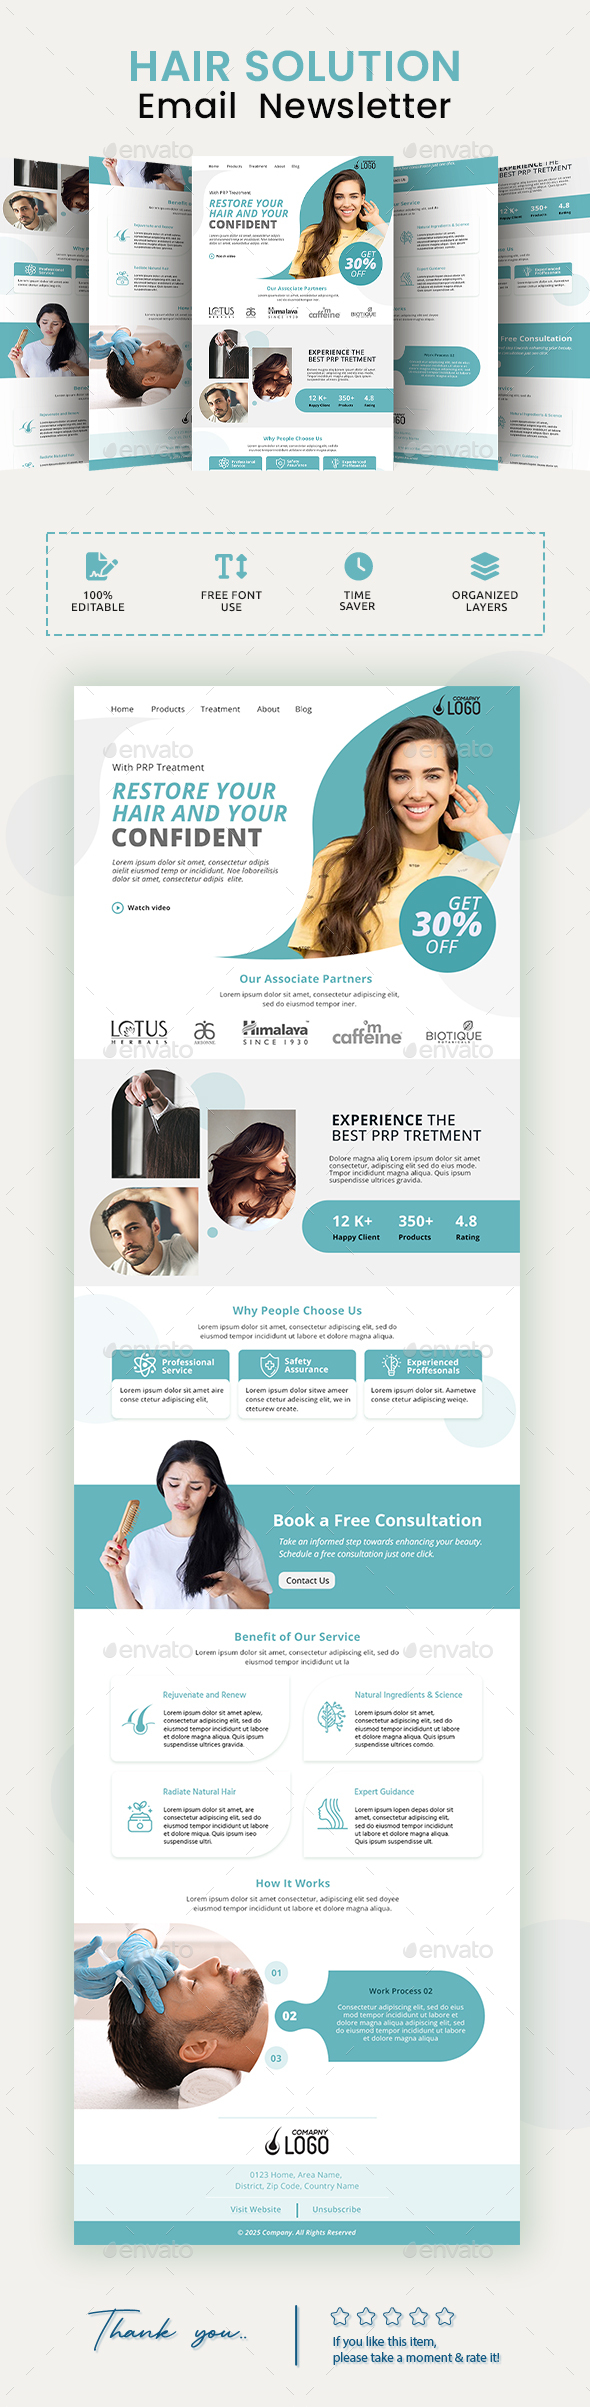 [DOWNLOAD]Hair Solution Email Newsletter PSD Template